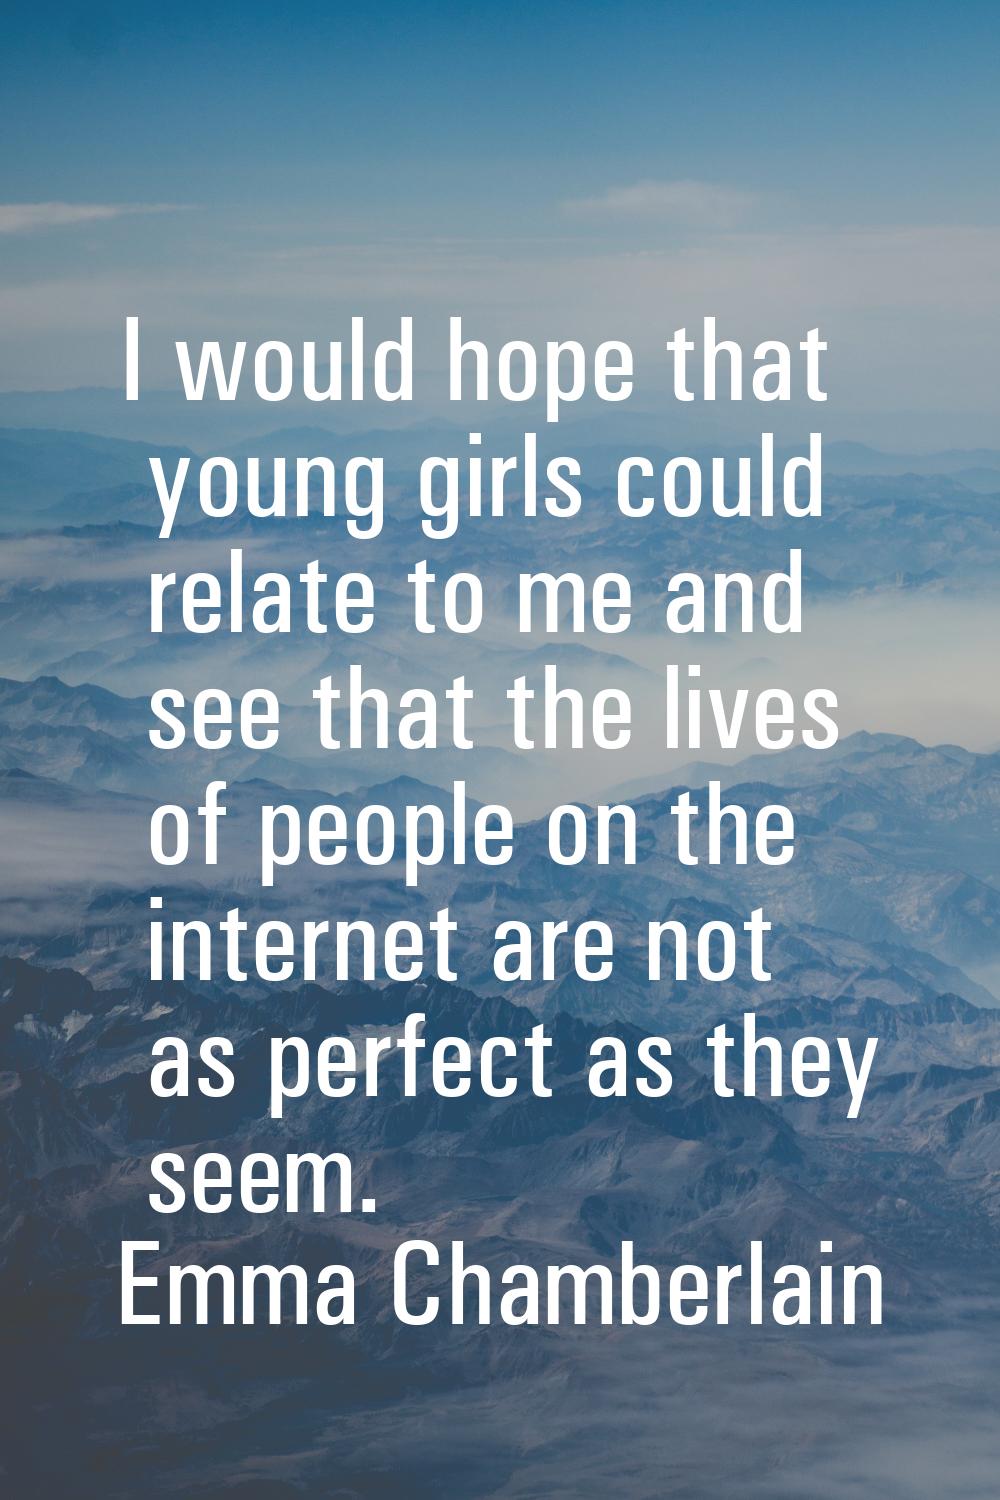 I would hope that young girls could relate to me and see that the lives of people on the internet a